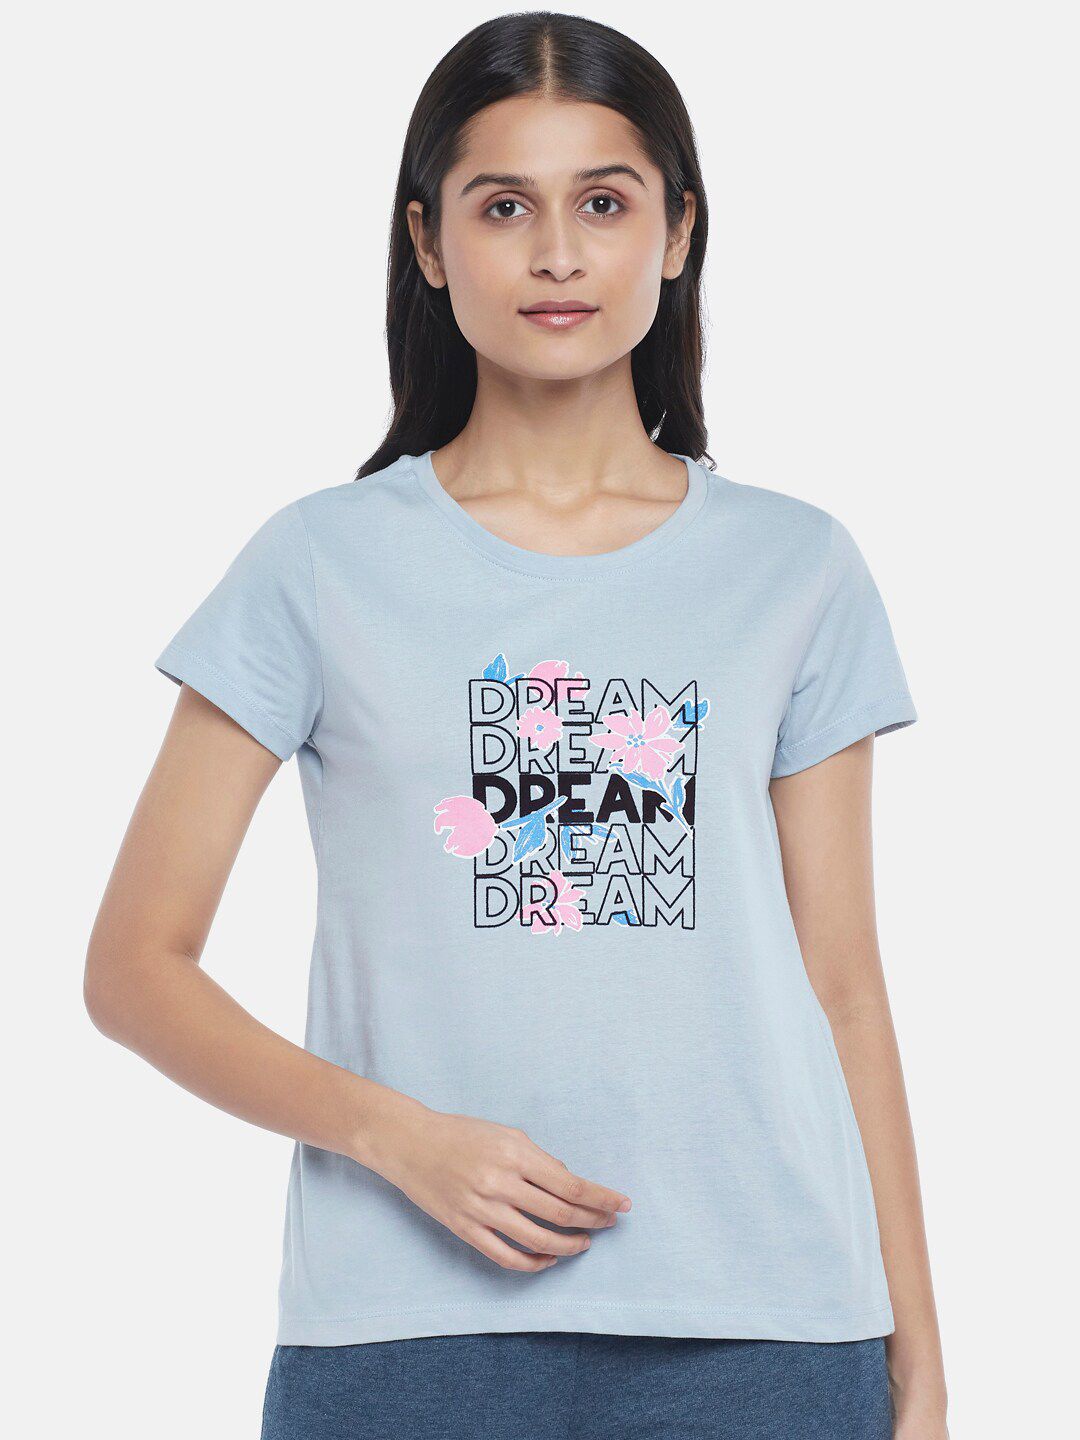 Dreamz by Pantaloons Blue Print Lounge tshirt Price in India